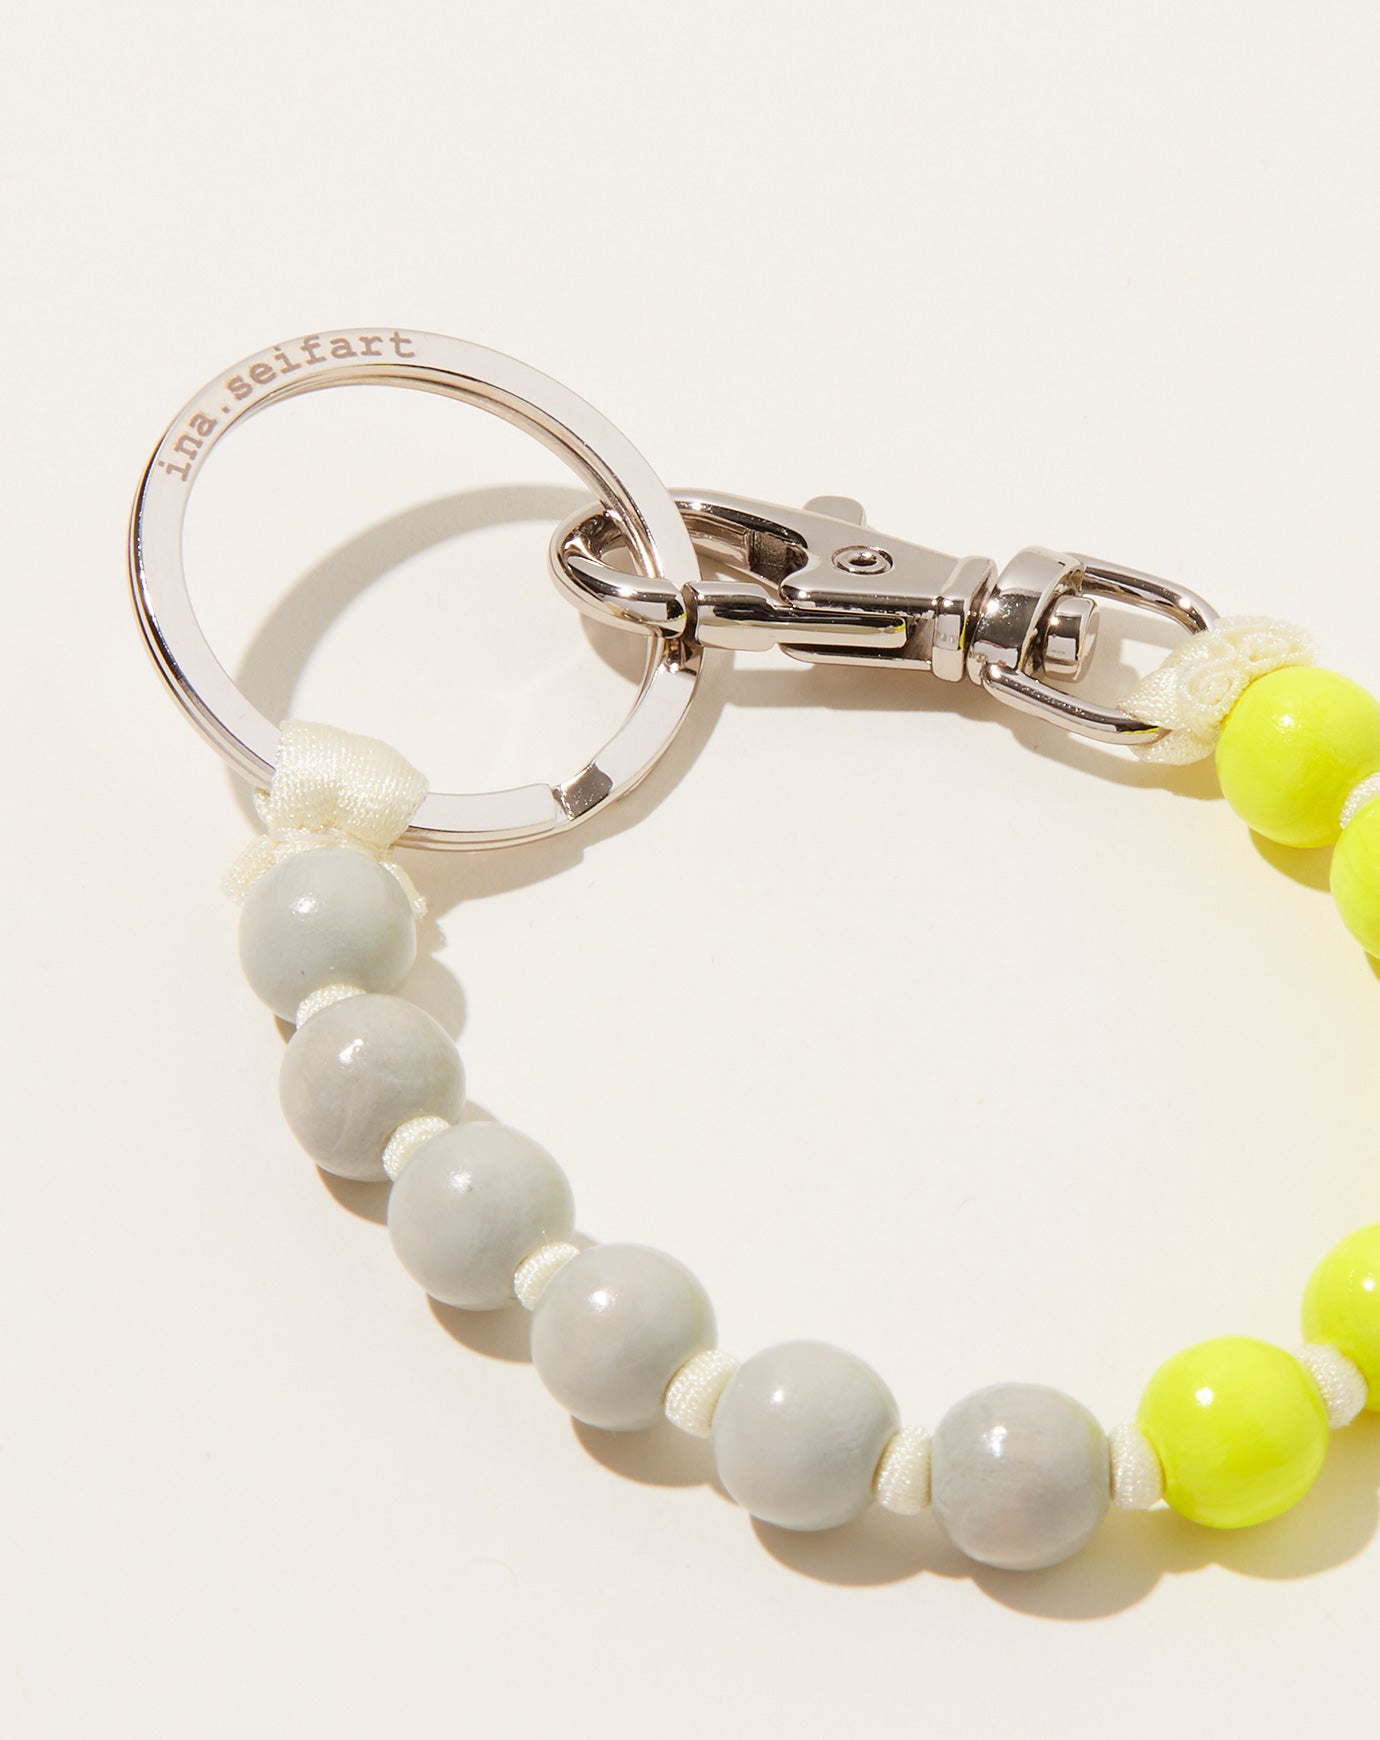 Ina Seifart Perlen Short Keyholder in Light Grey Neon Yellow and Opal